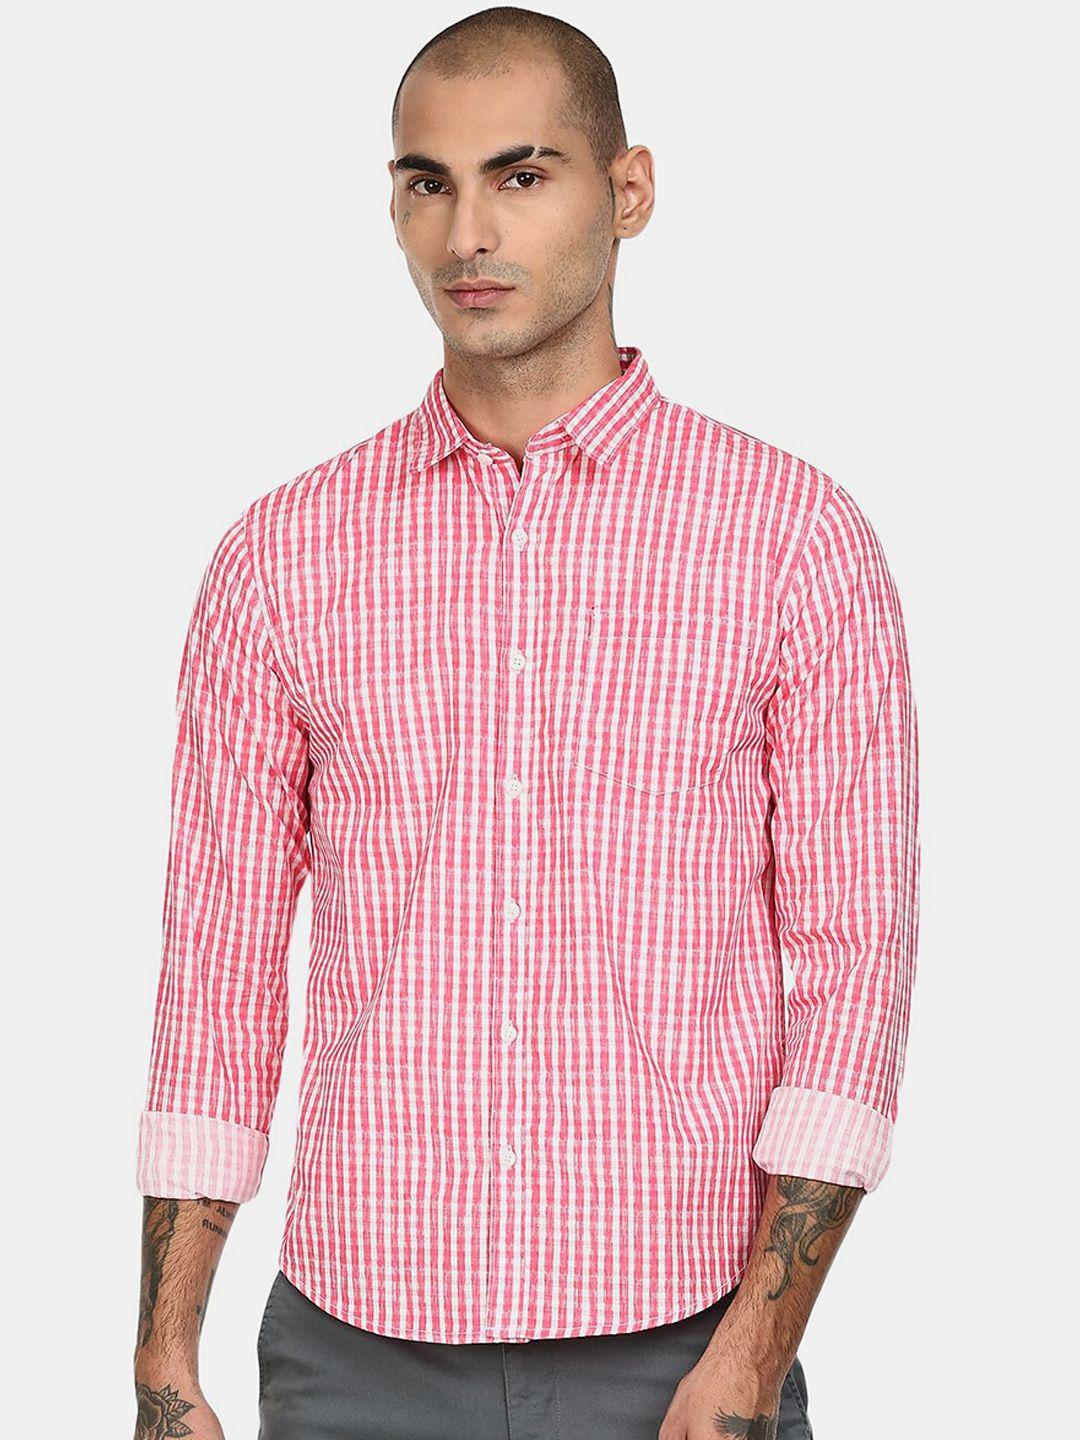 ruggers-men-red-&-white-striped-cotton-casual-shirt